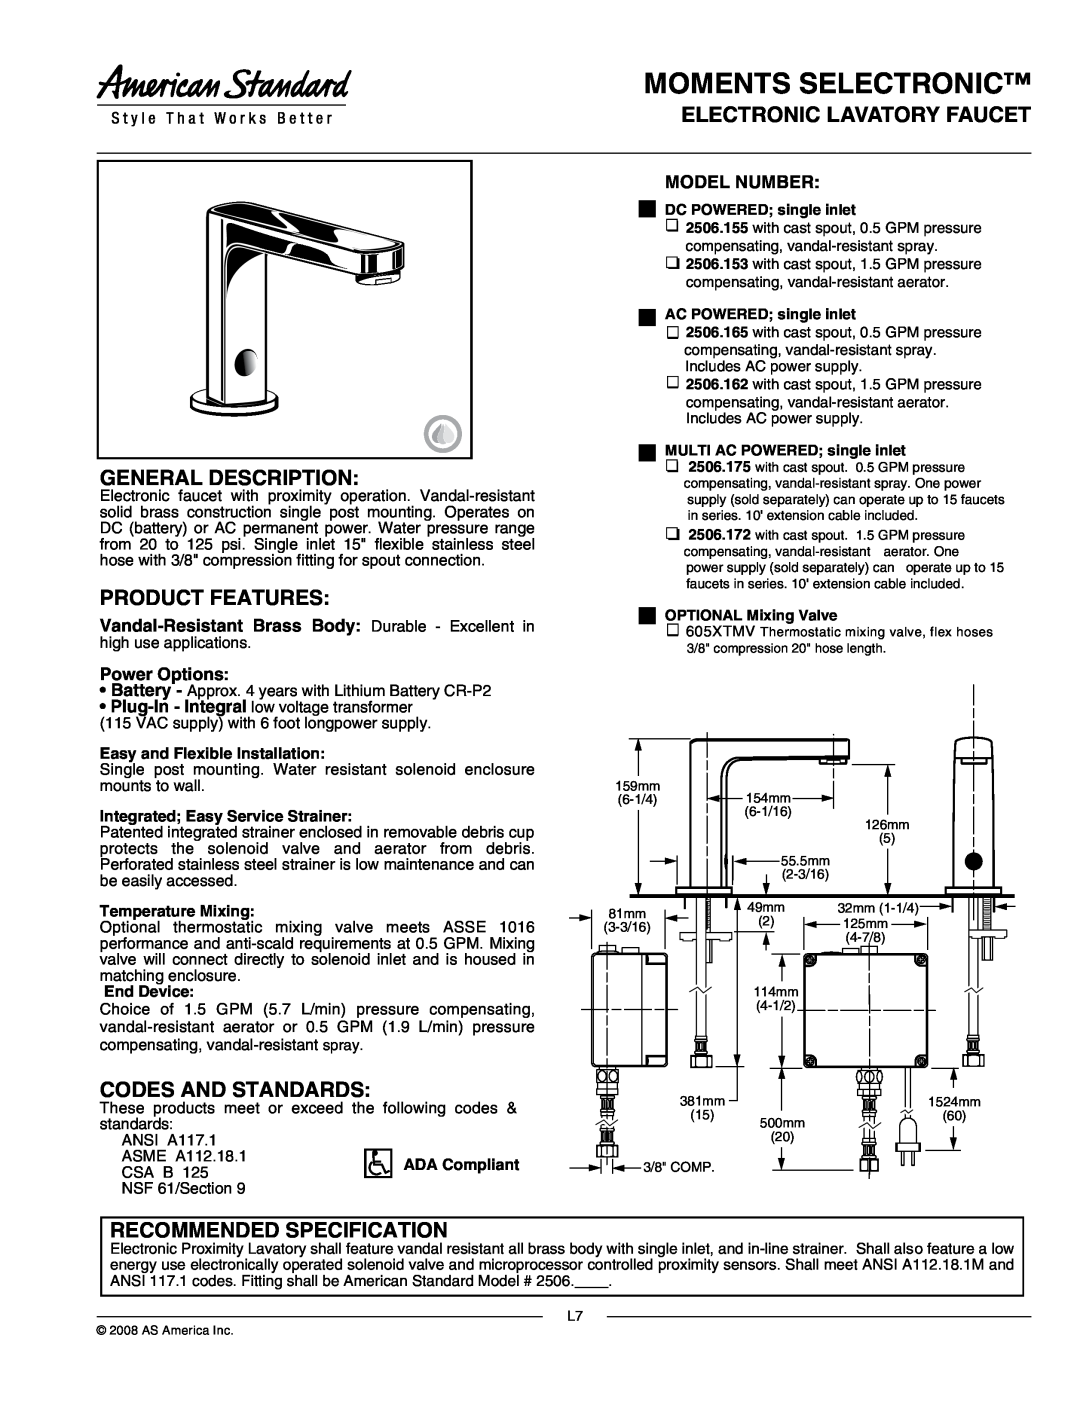 American Standard 2506.175 manual Moments Selectronic, Electronic Lavatory Faucet, General Description, Product Features 